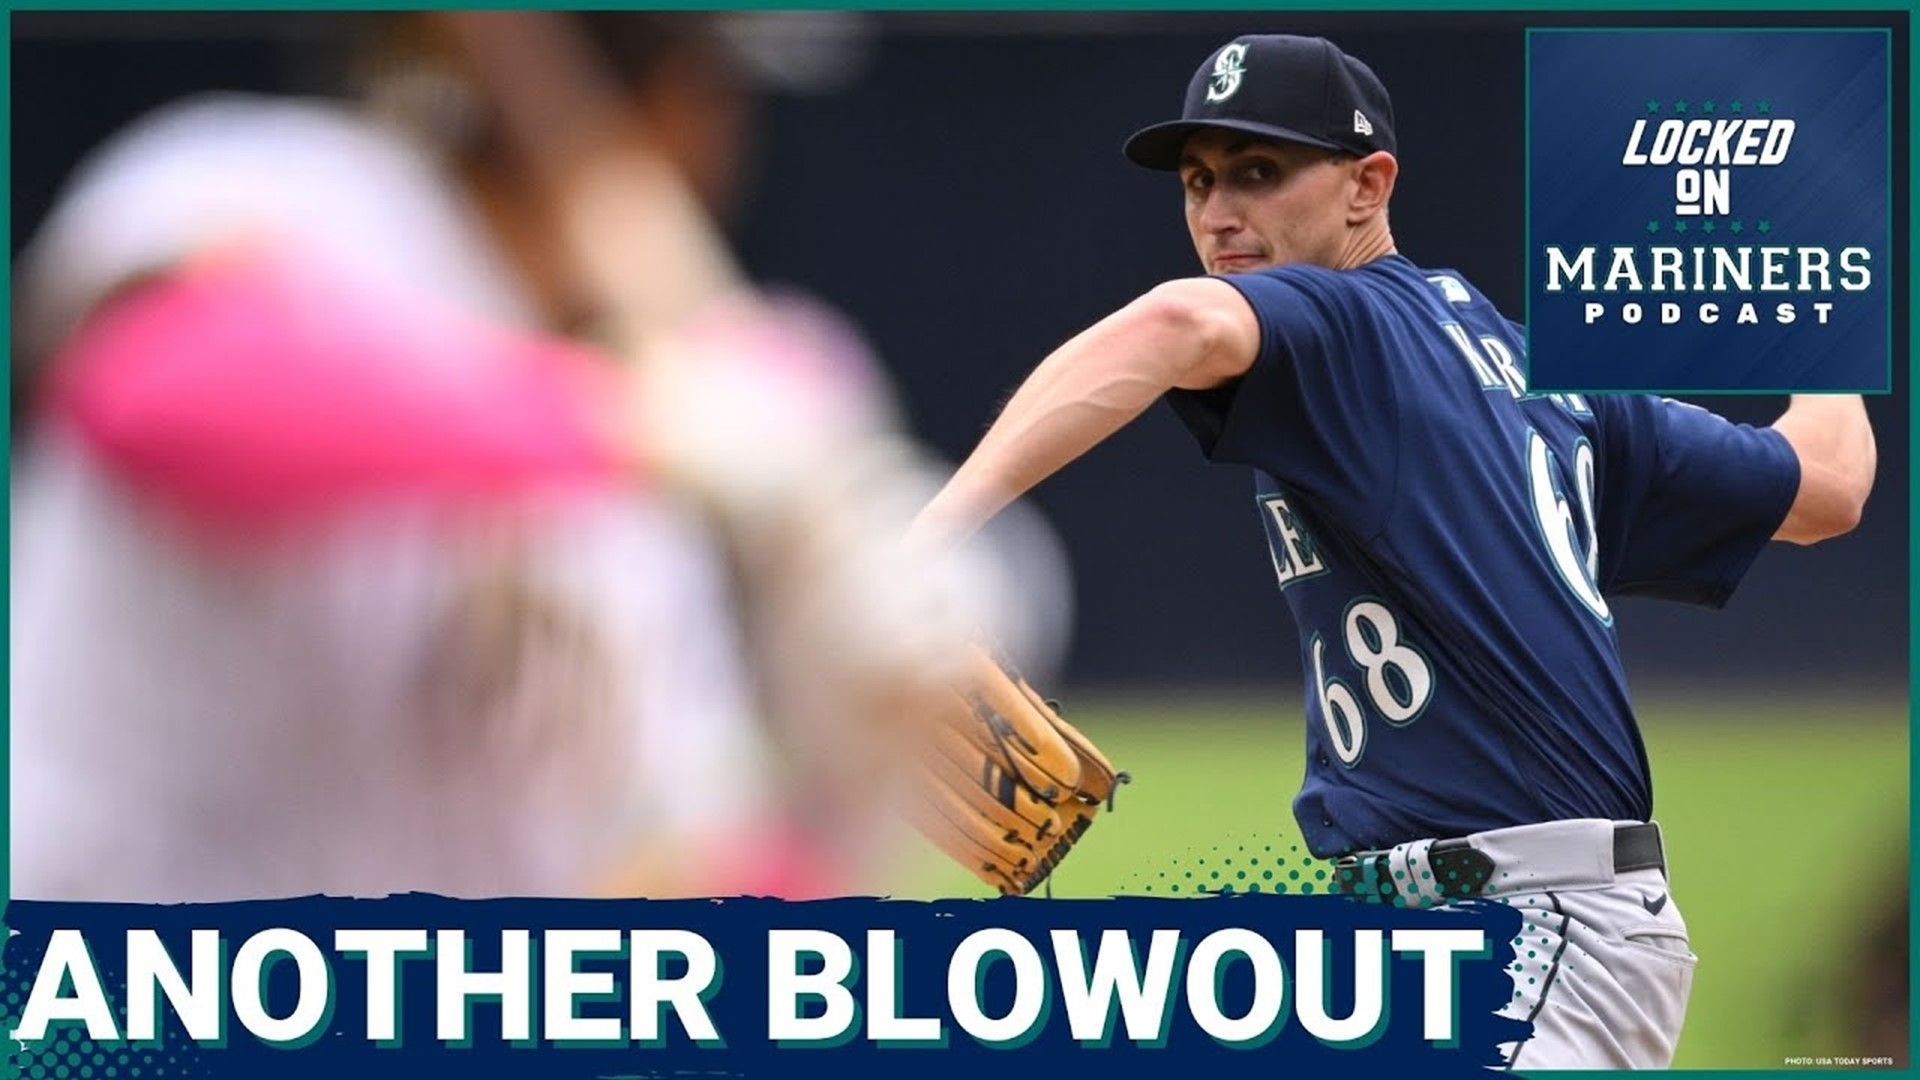 After a beautiful win on Tuesday, the Mariners took the field on Wednesday afternoon and fell on their face, playing sloppy ball in all 3 phases.